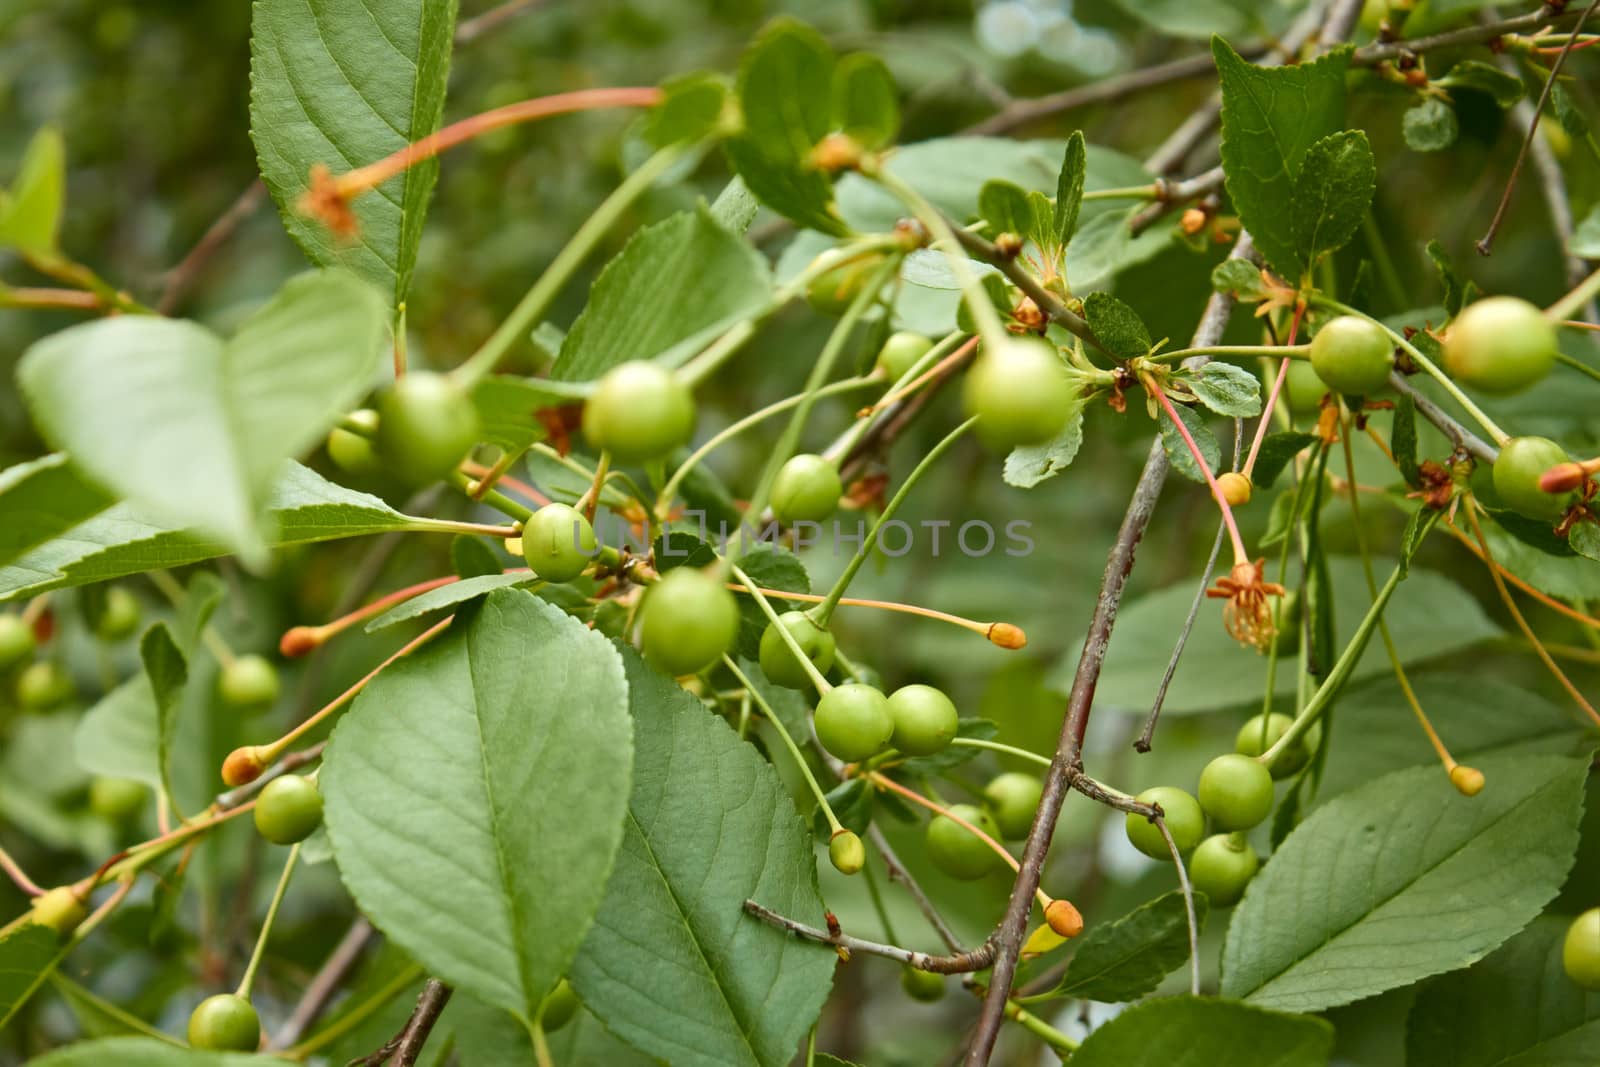 Green fruit of cherry tree moved by qiiip